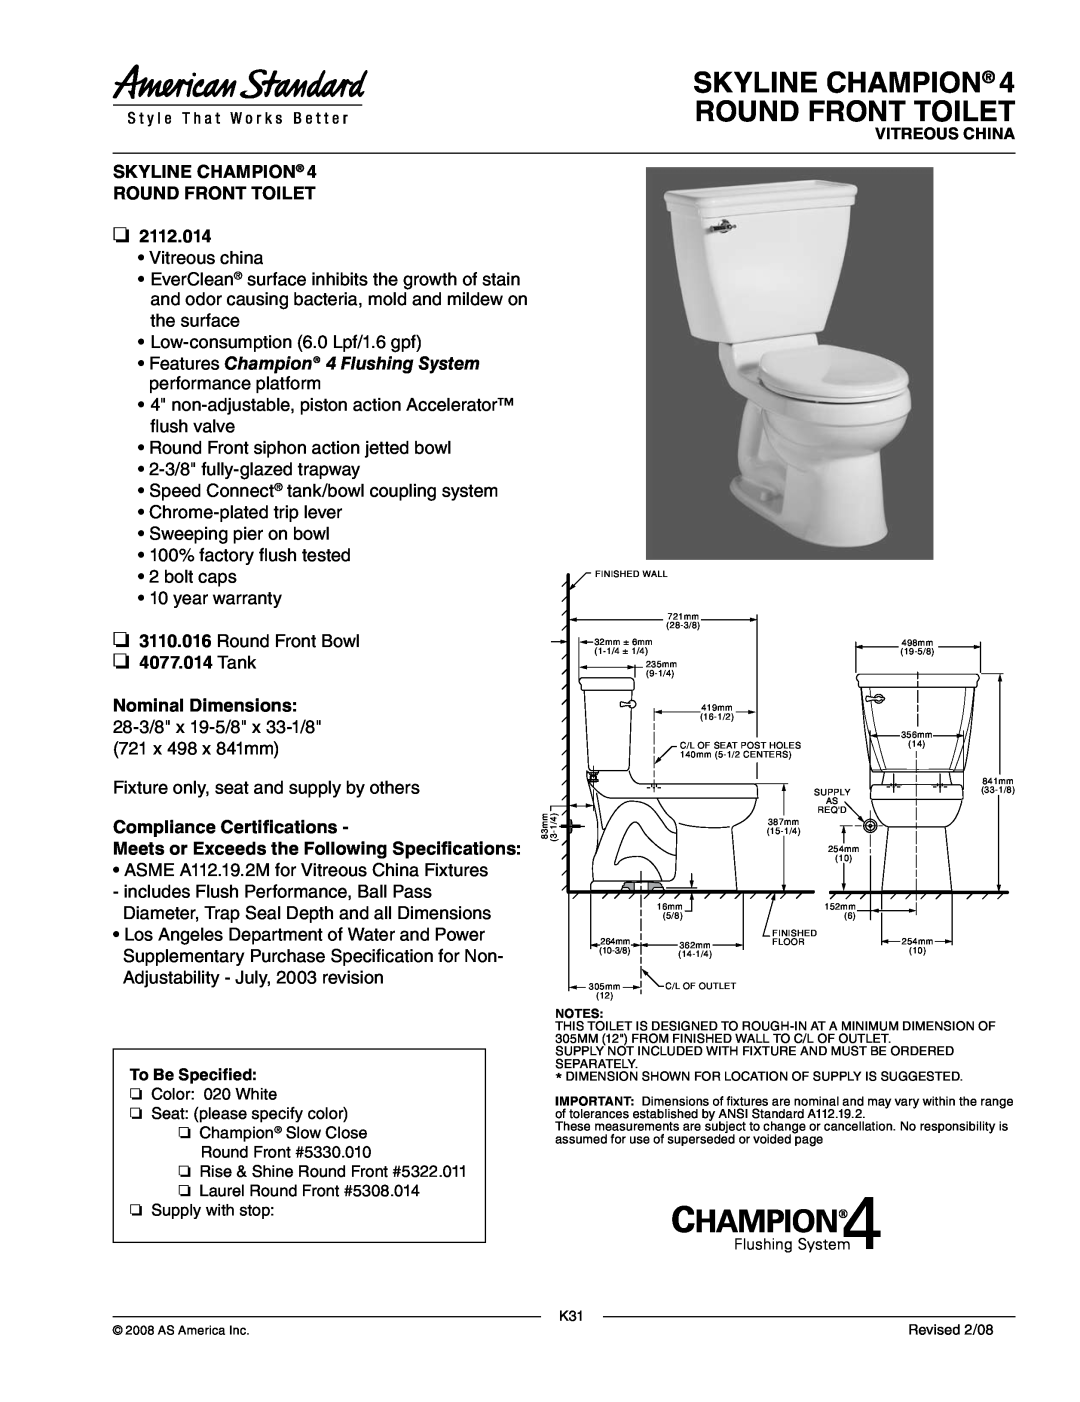 American Standard 2112.014 dimensions Skyline Champion Round Front Toilet, Tank Nominal Dimensions 